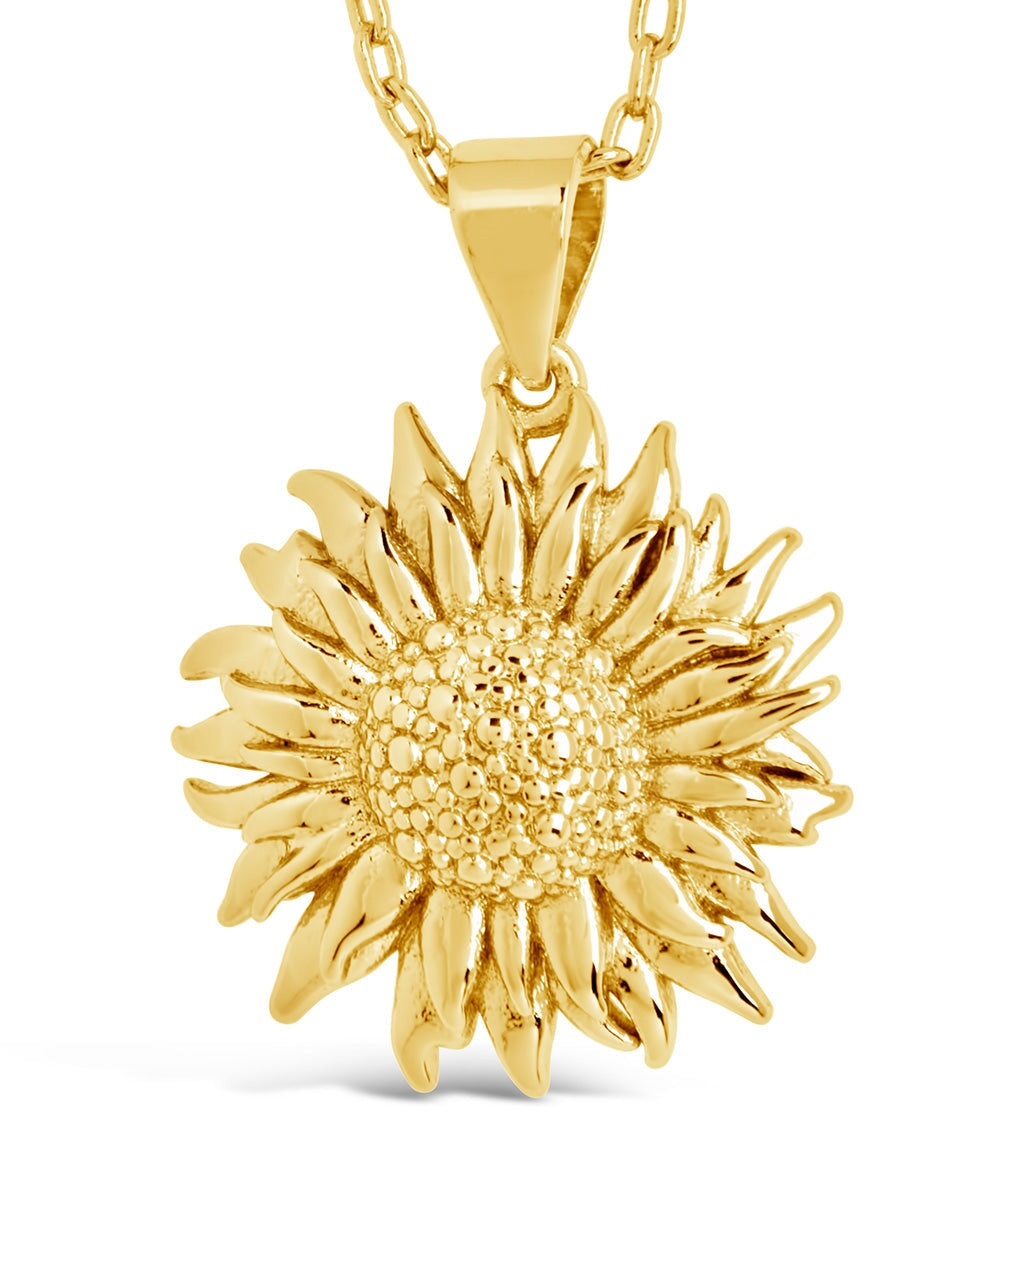 Solaris Sunflower Pendant Necklace Necklace Sterling Forever Gold 